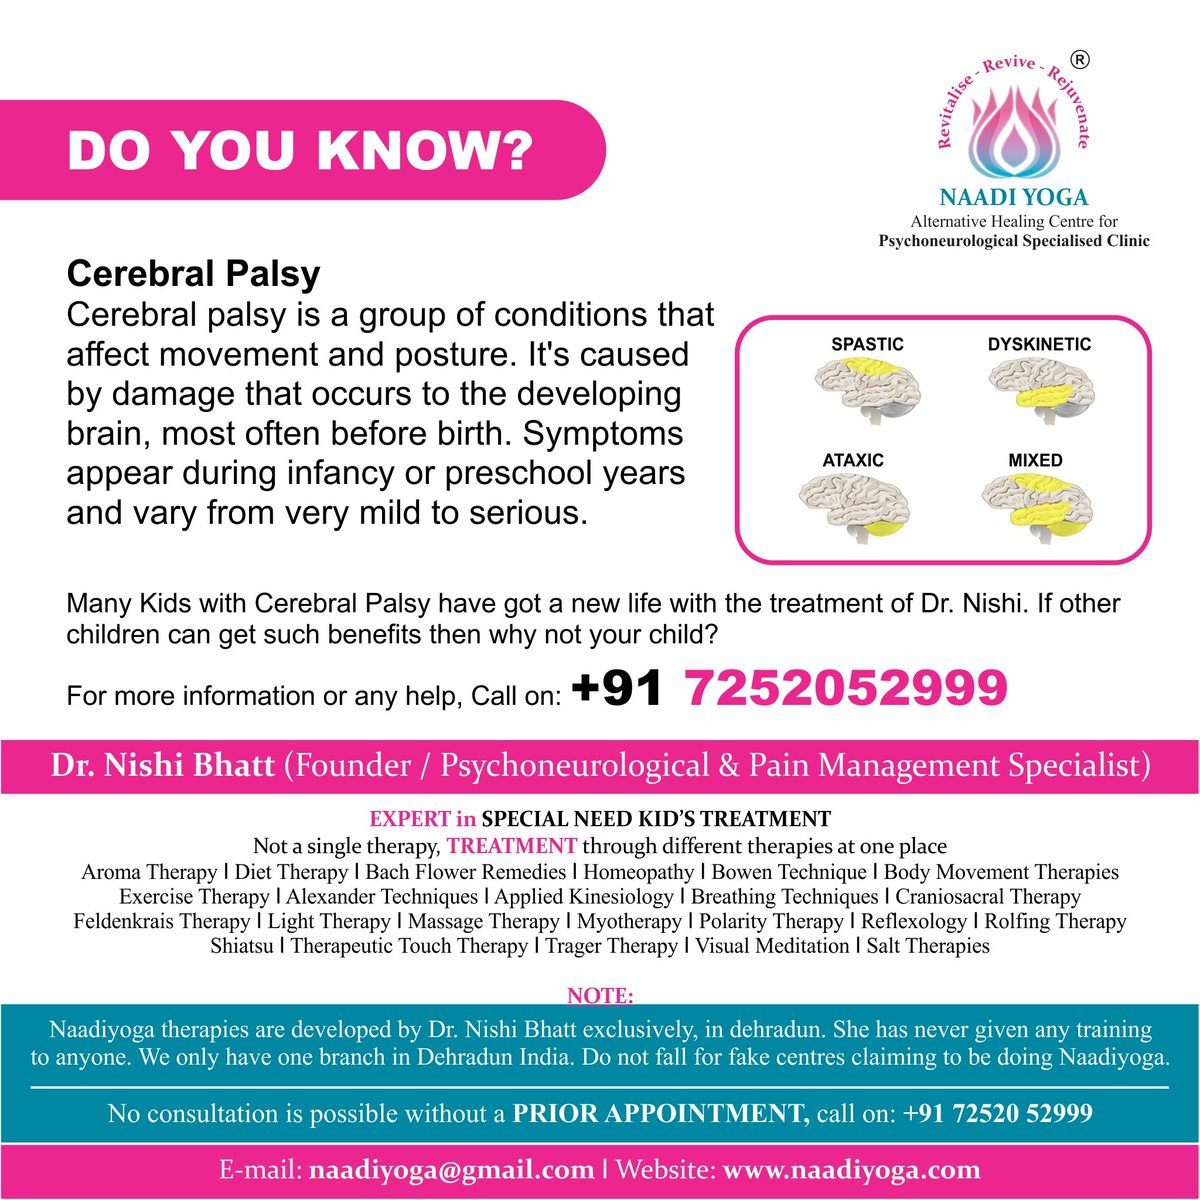 Do you know - Cerebral palsy is a group of conditions that affect movement and posture. It's caused by damage that occurs to the developing brain, most often before birth?

If your child is also suffering with CEREBRAL PALSY then you can call on: +91 7252052999

#cerebralpalsy